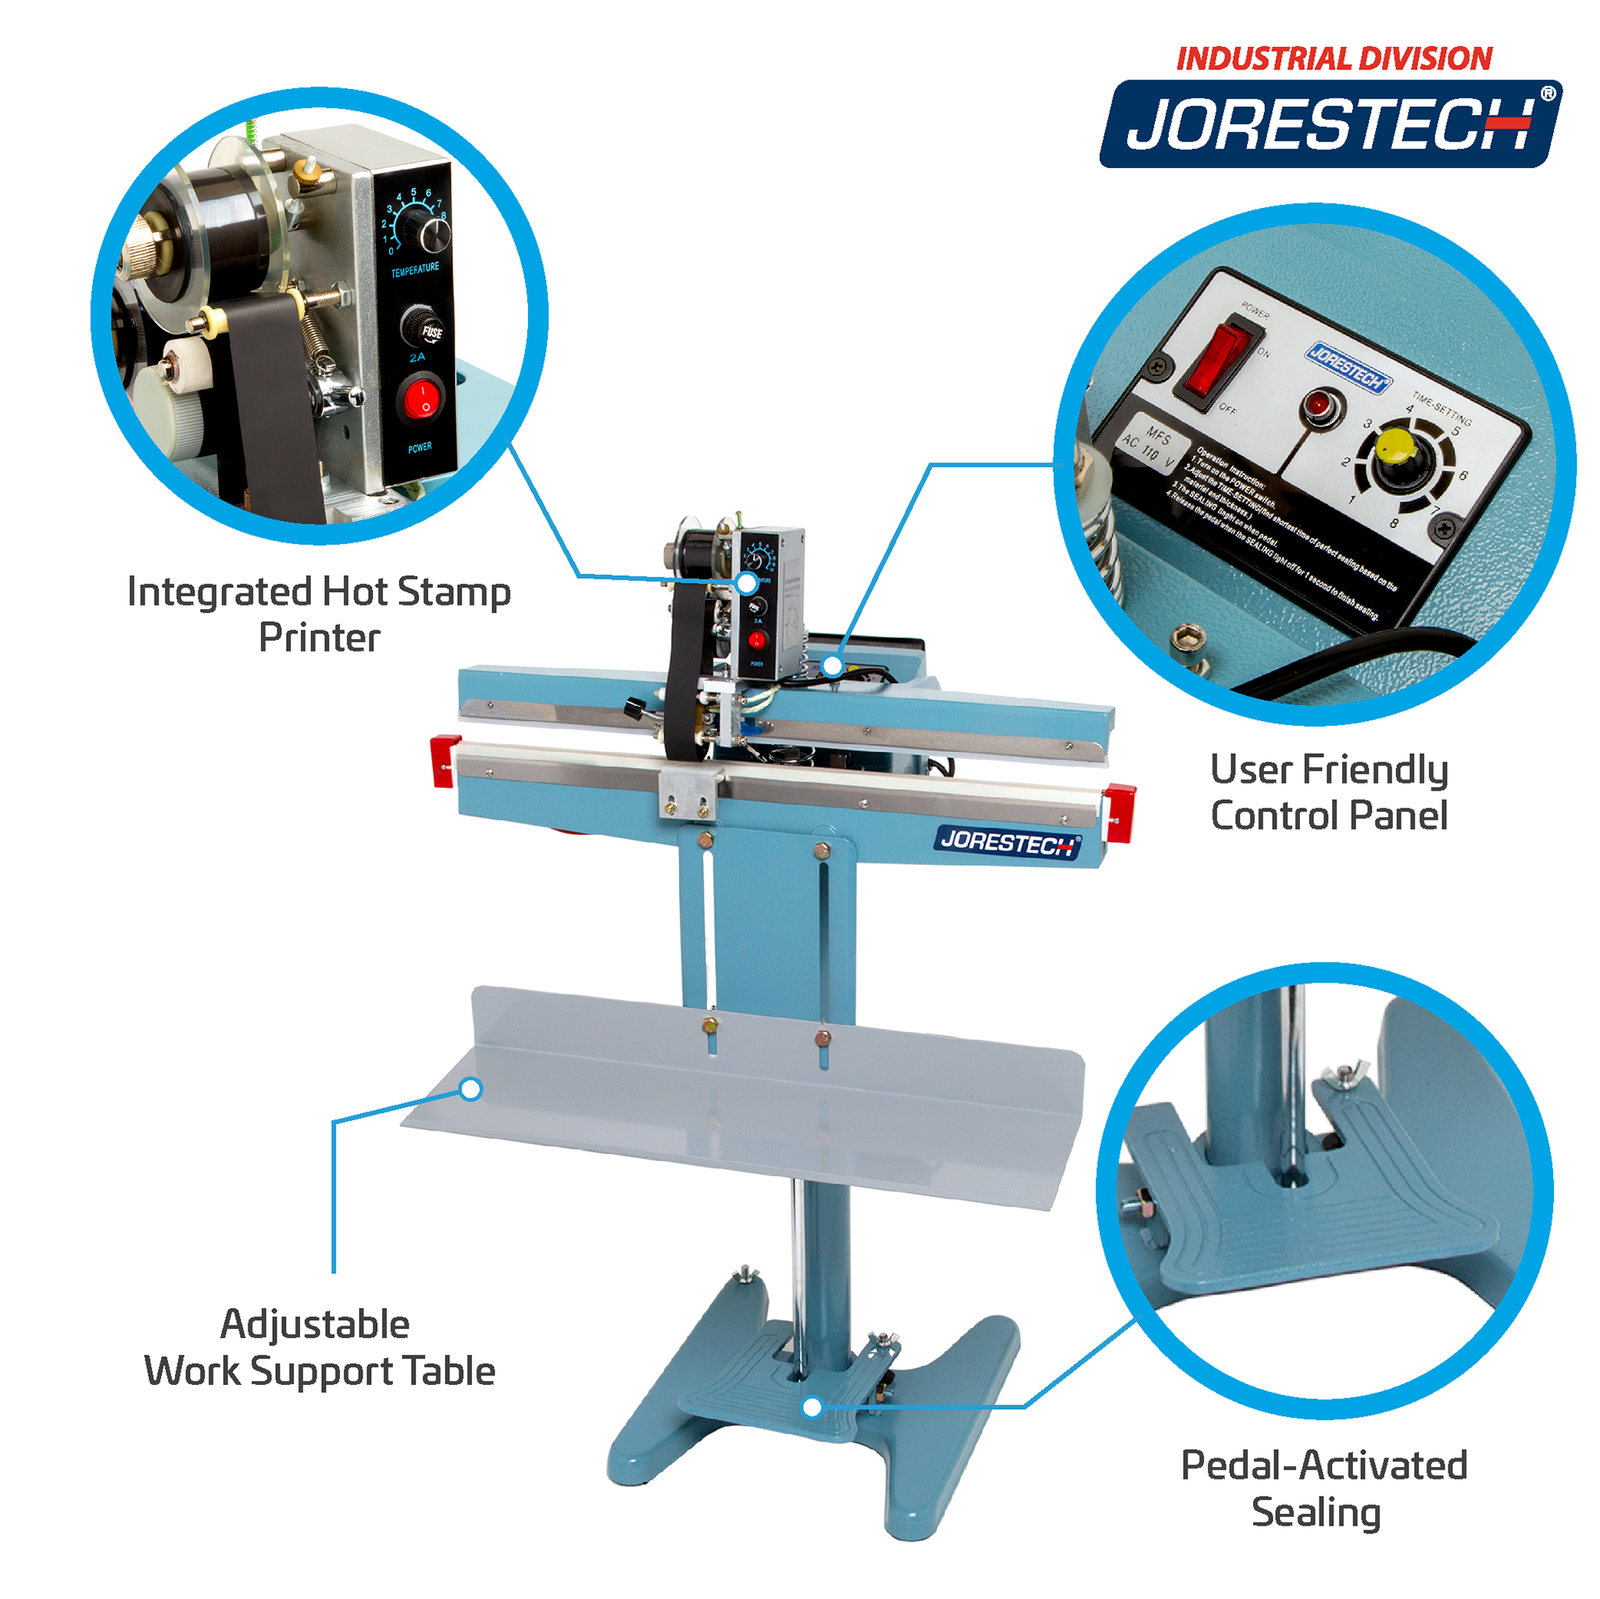 Infographic shows blue JORES TECHNOLOGIES® foot impulse bag sealer over white background. Highlighted features include, Integrated Hot Stamp Printer, User Friendly Control Panel, Pedal-Activated Sealing, and Adjustable Work Support Table. Close-ups of a hot stamp printer, foot pedal, and control panel.